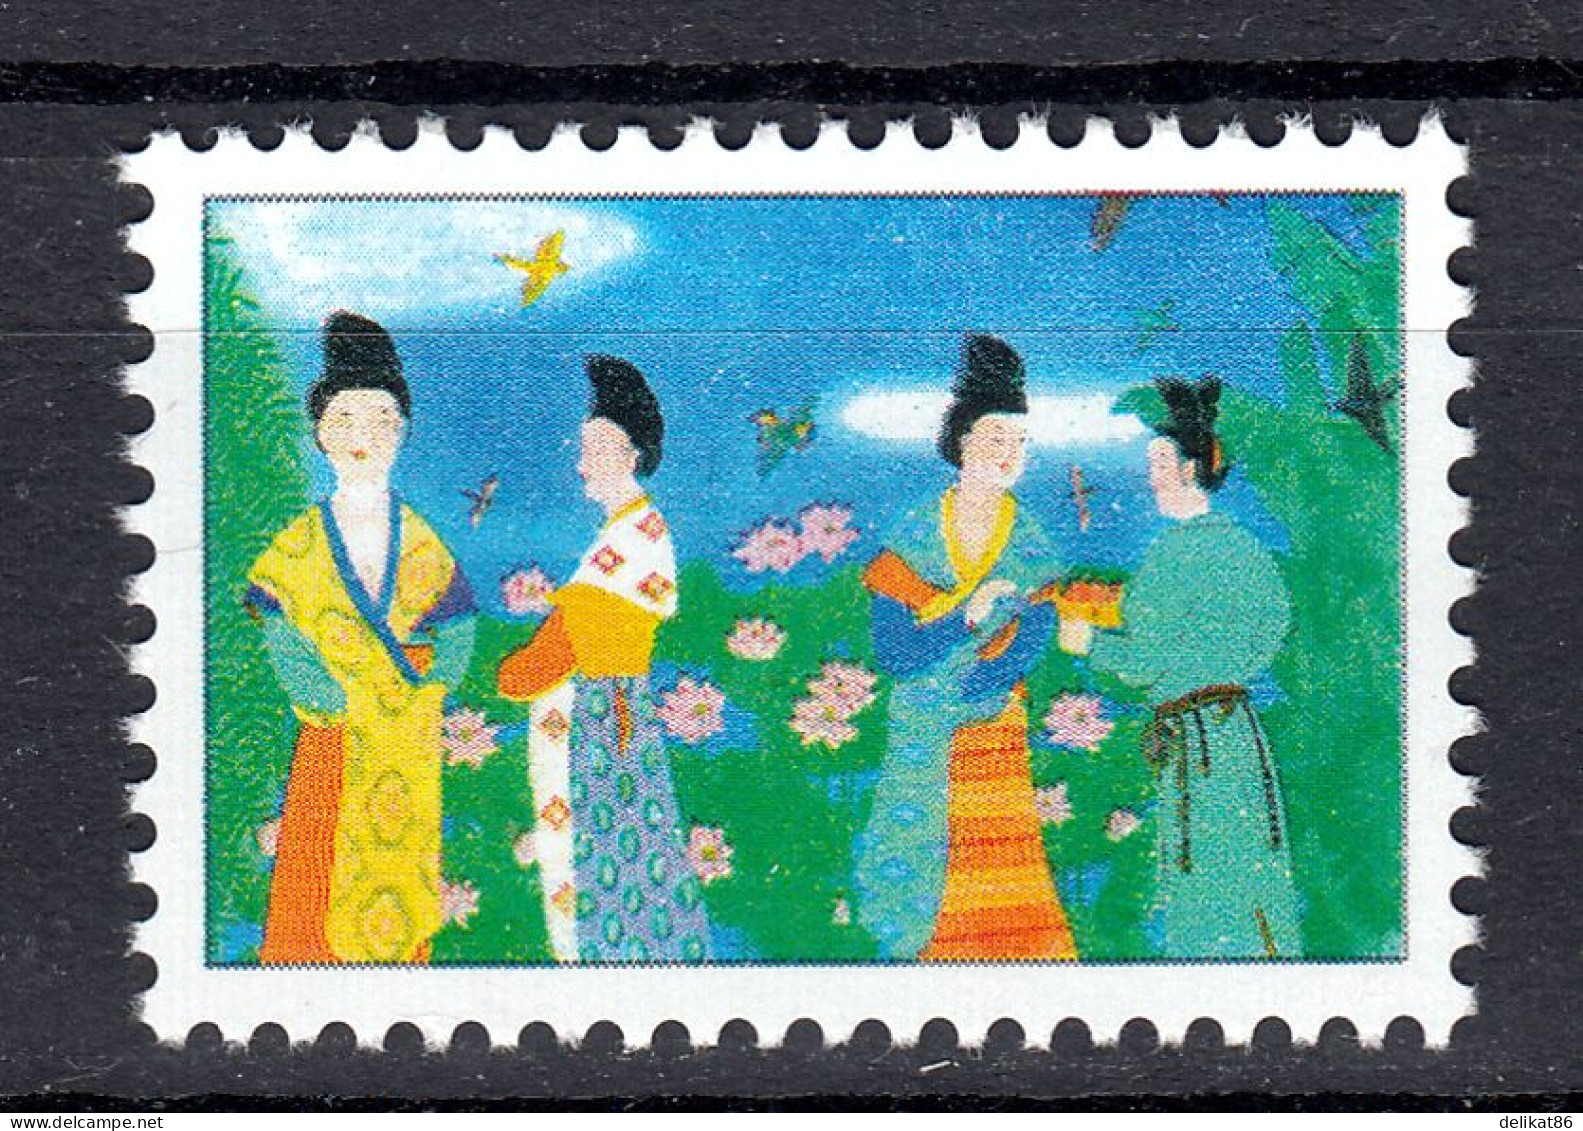 Probedruck Test Stamp Specimen China 1997  "Tang Dynasty Painting" - Prove E Ristampe